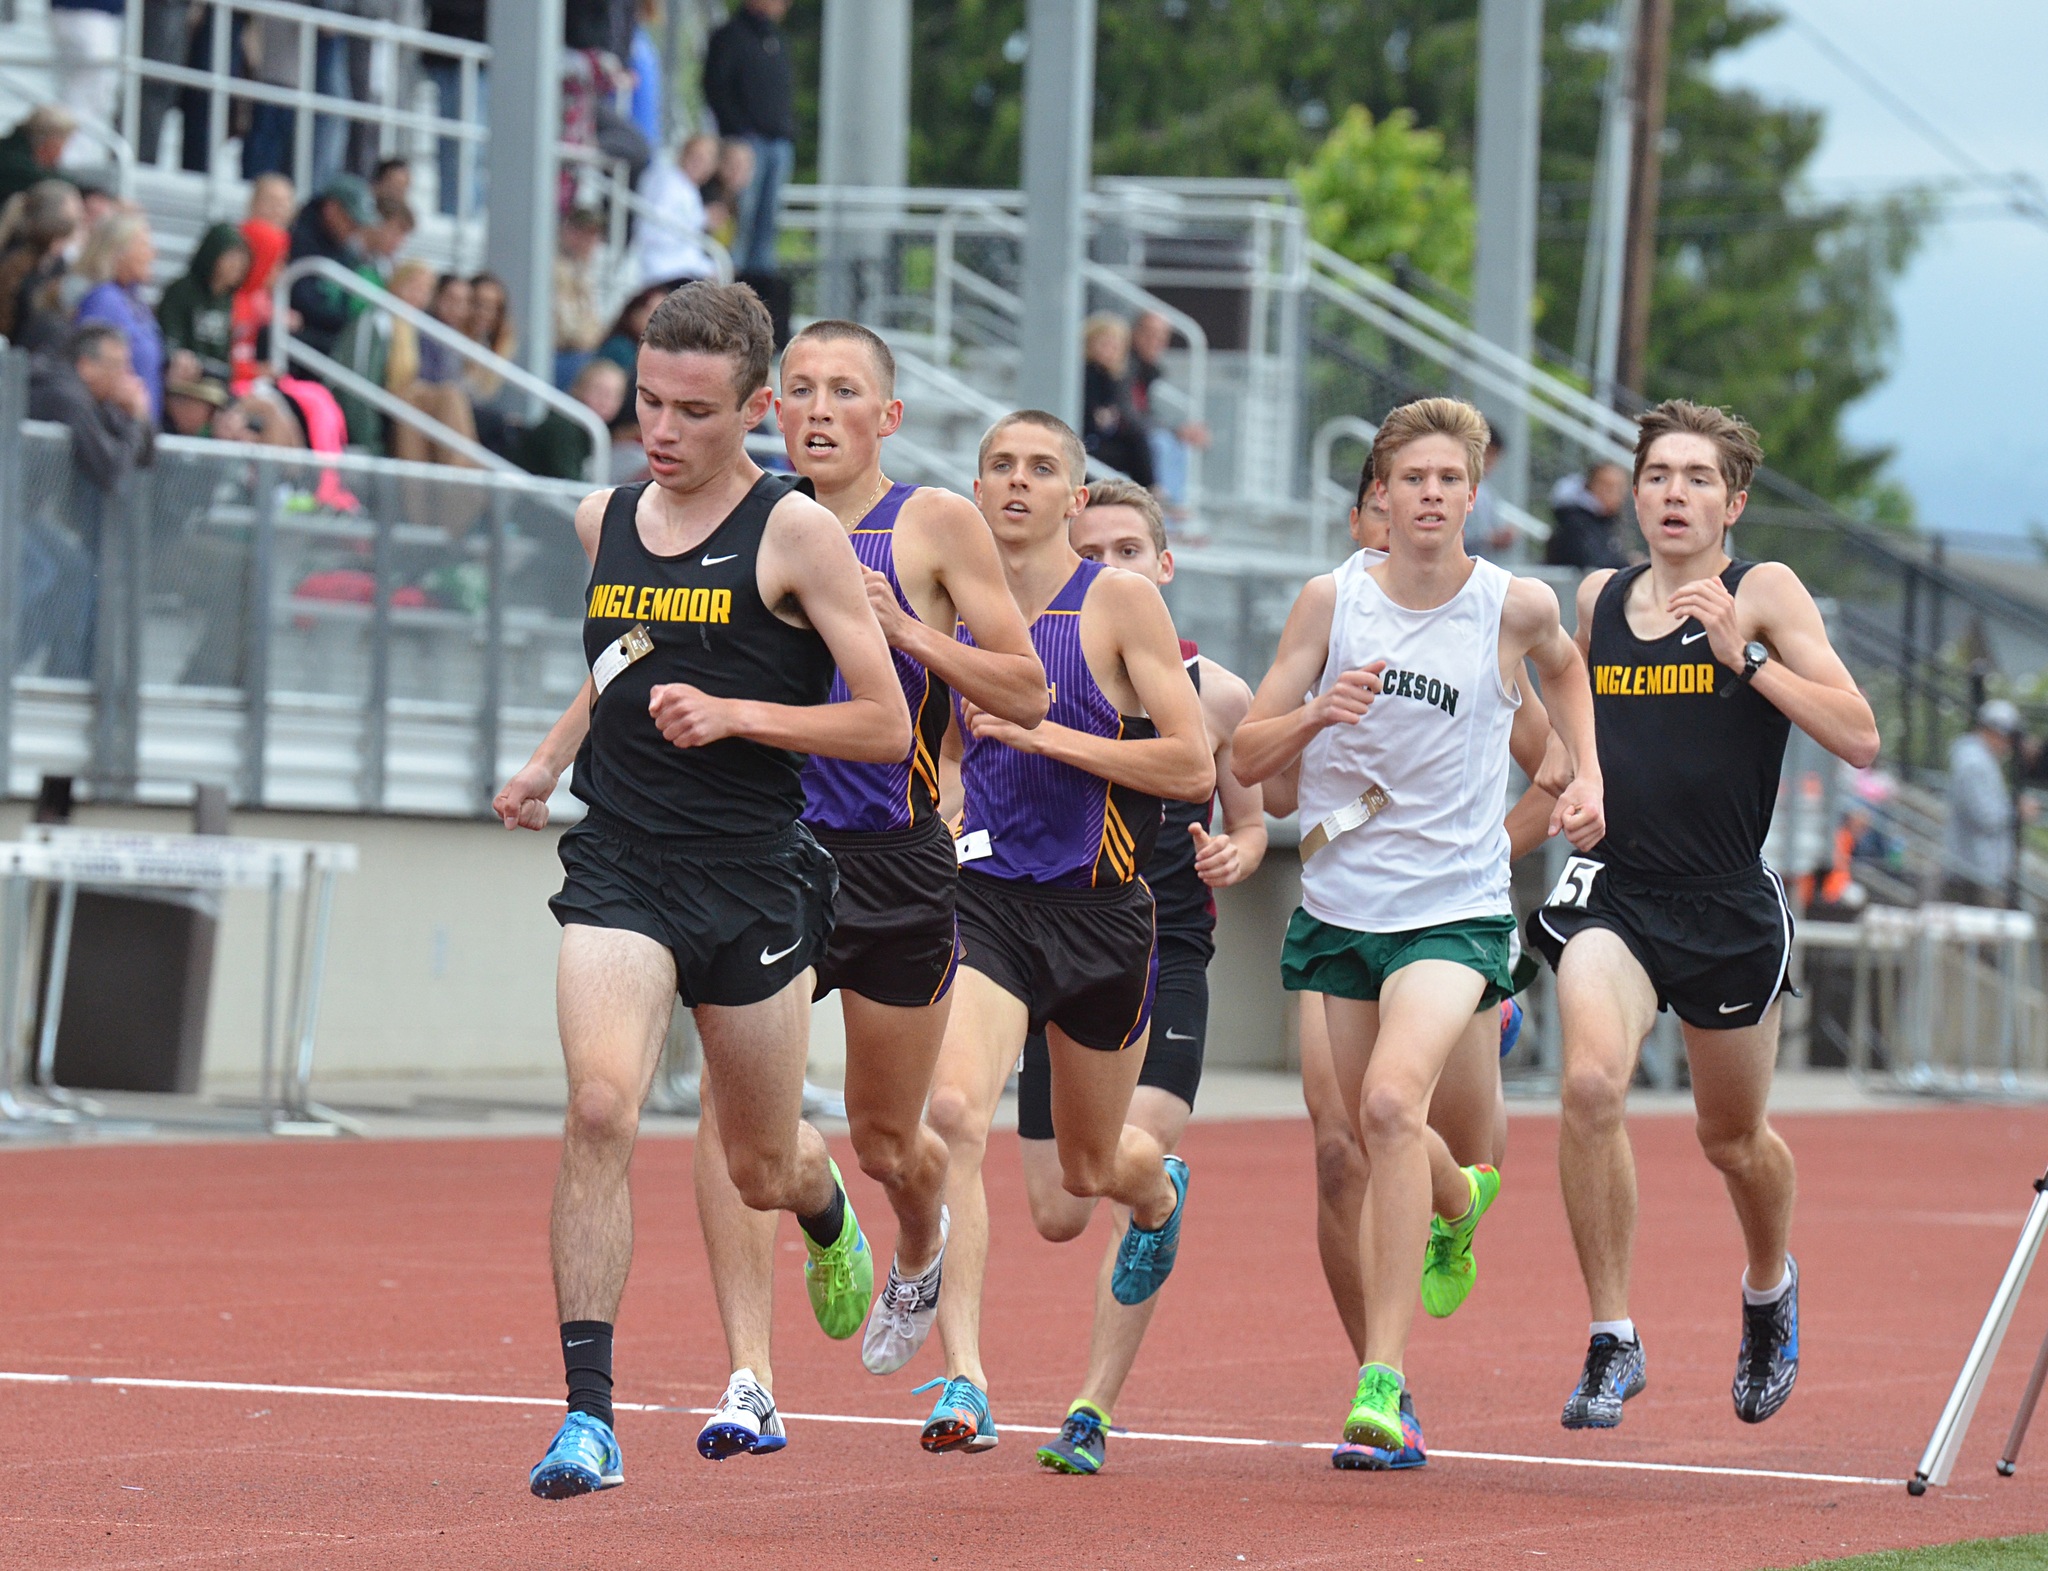 Inglemoor’s Nick Laccinole leads the field in the 1600 meters on Wednesday